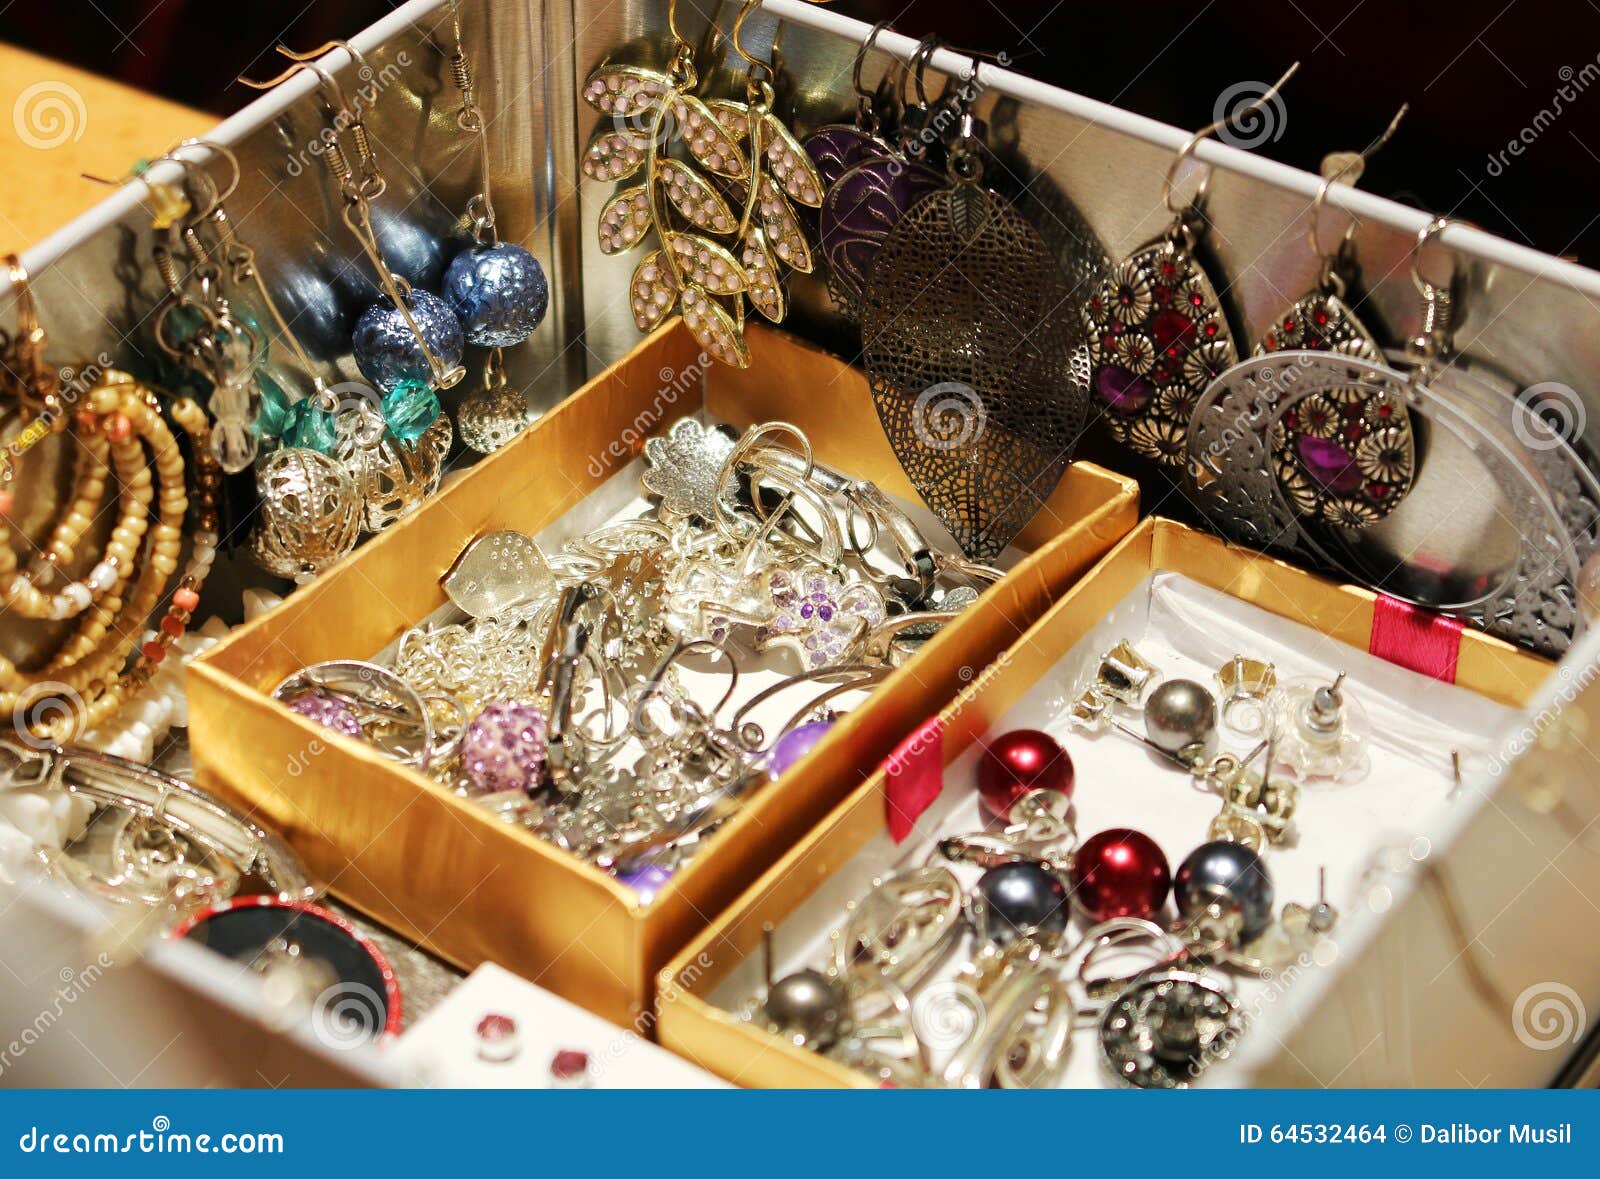 Box Full of Women S Jewelry and Earrings Stock Photo - Image of style ...